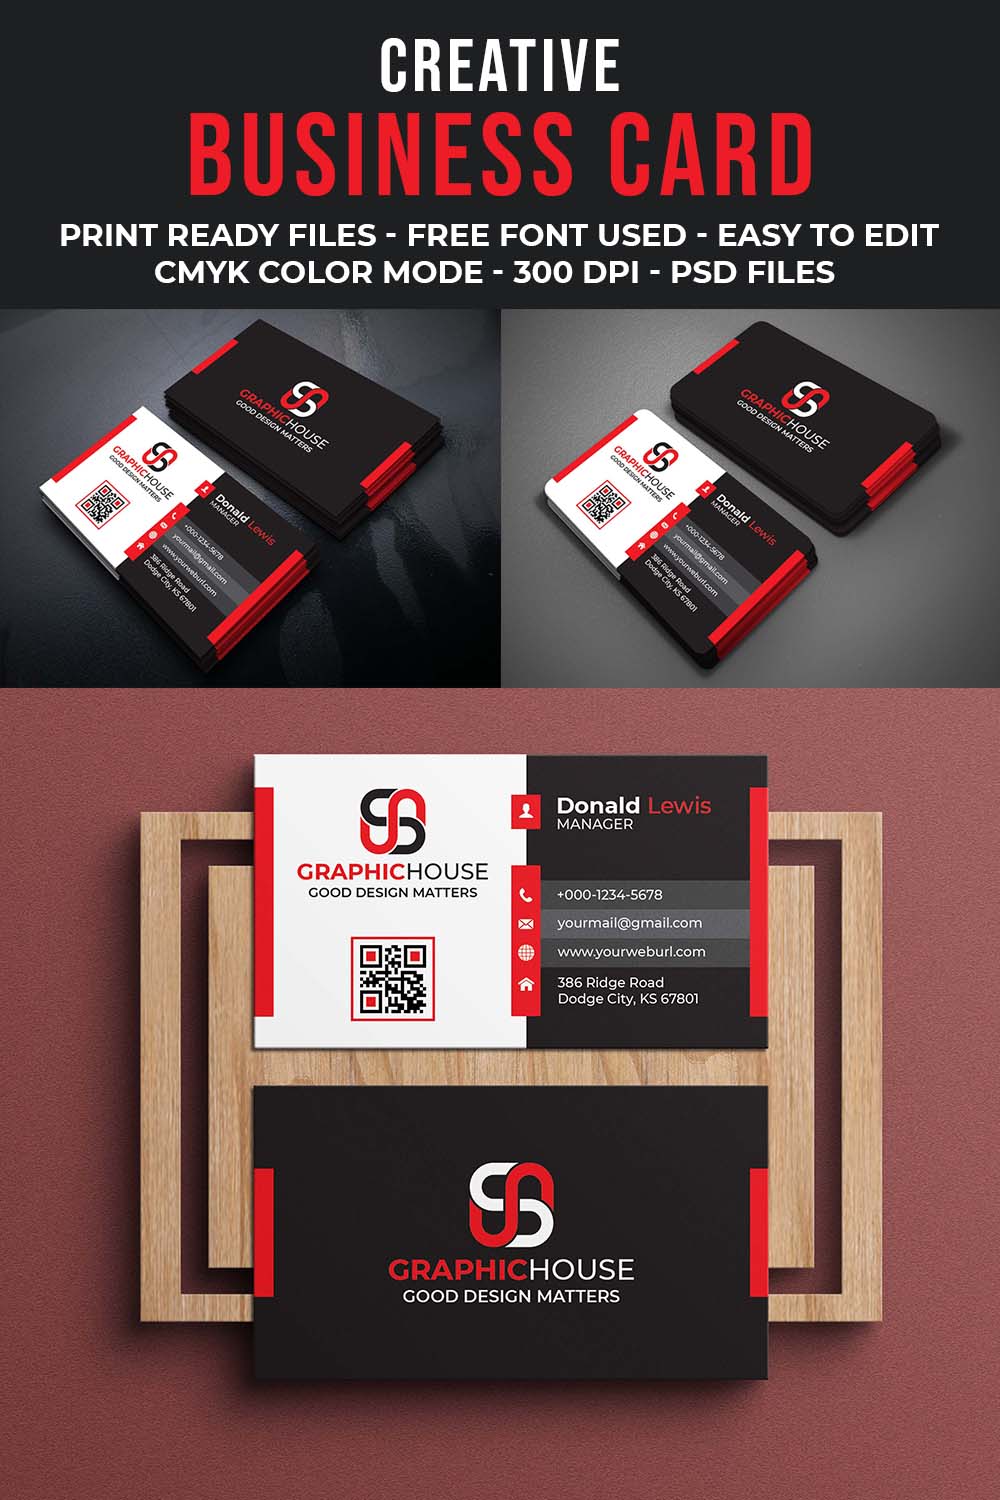 Creative And Professional Business Card Template Pinterest Image.